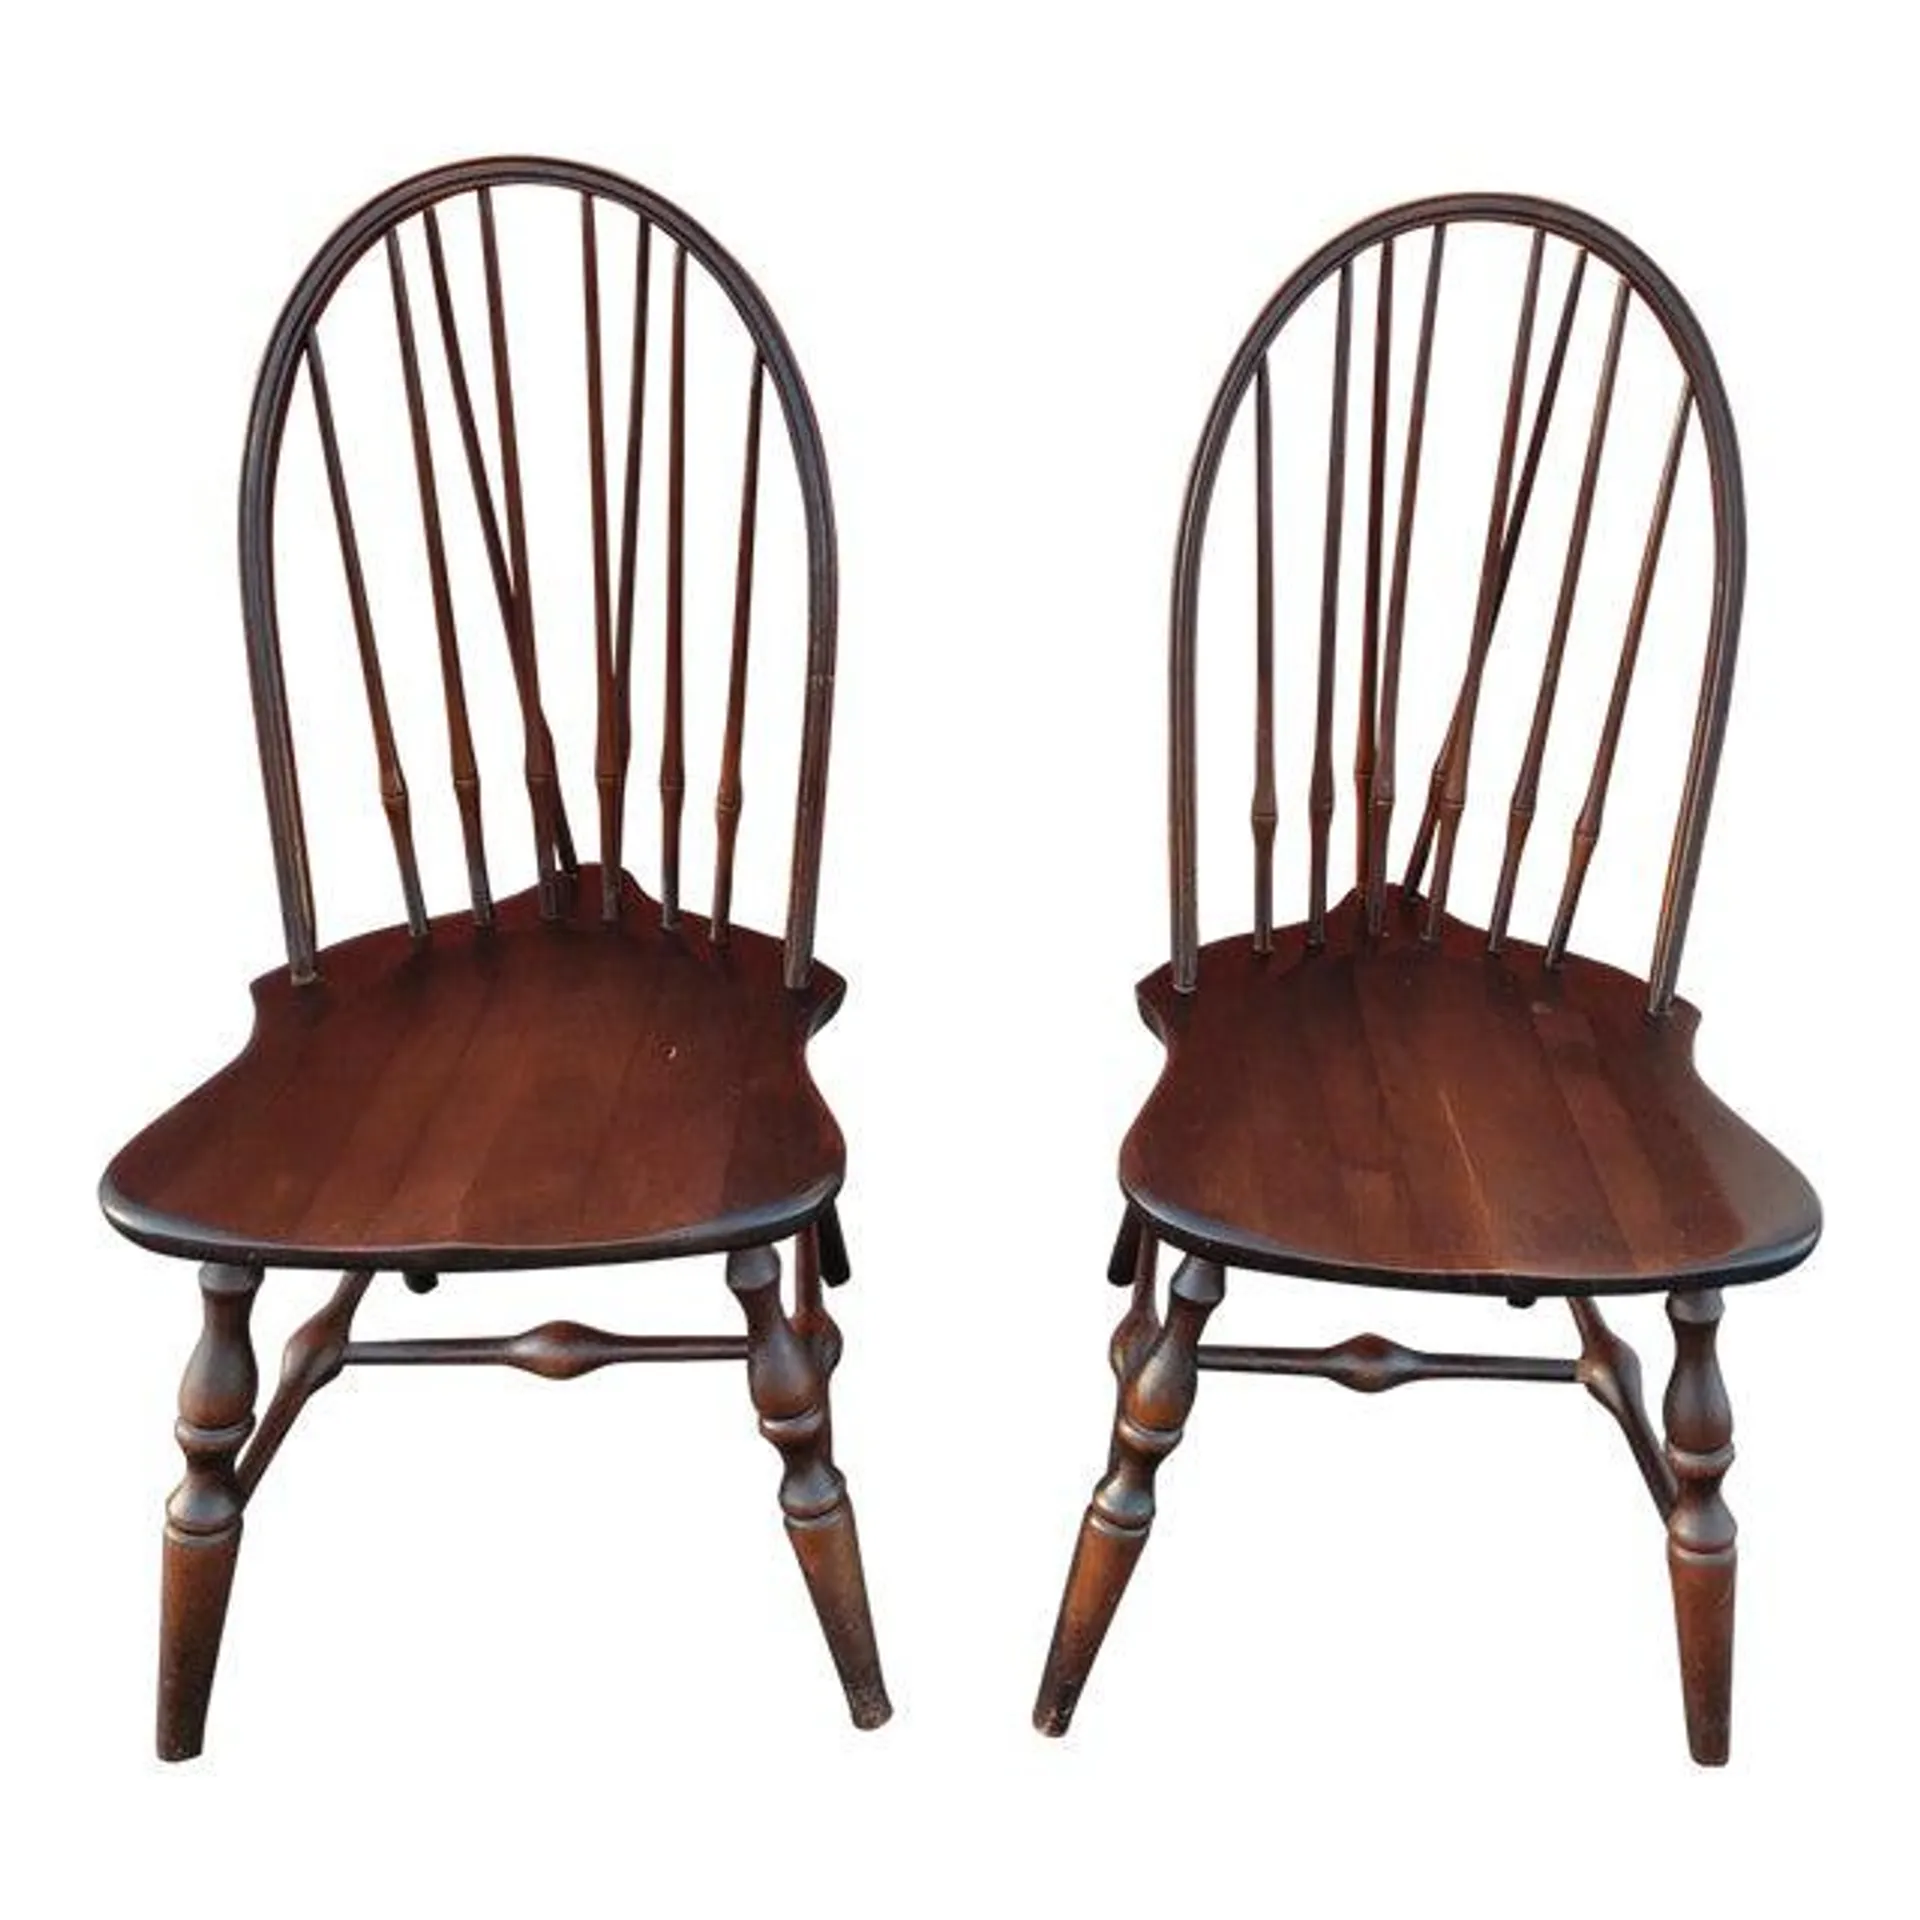 Nichols & Stone Windsor Side Chairs - a Pair